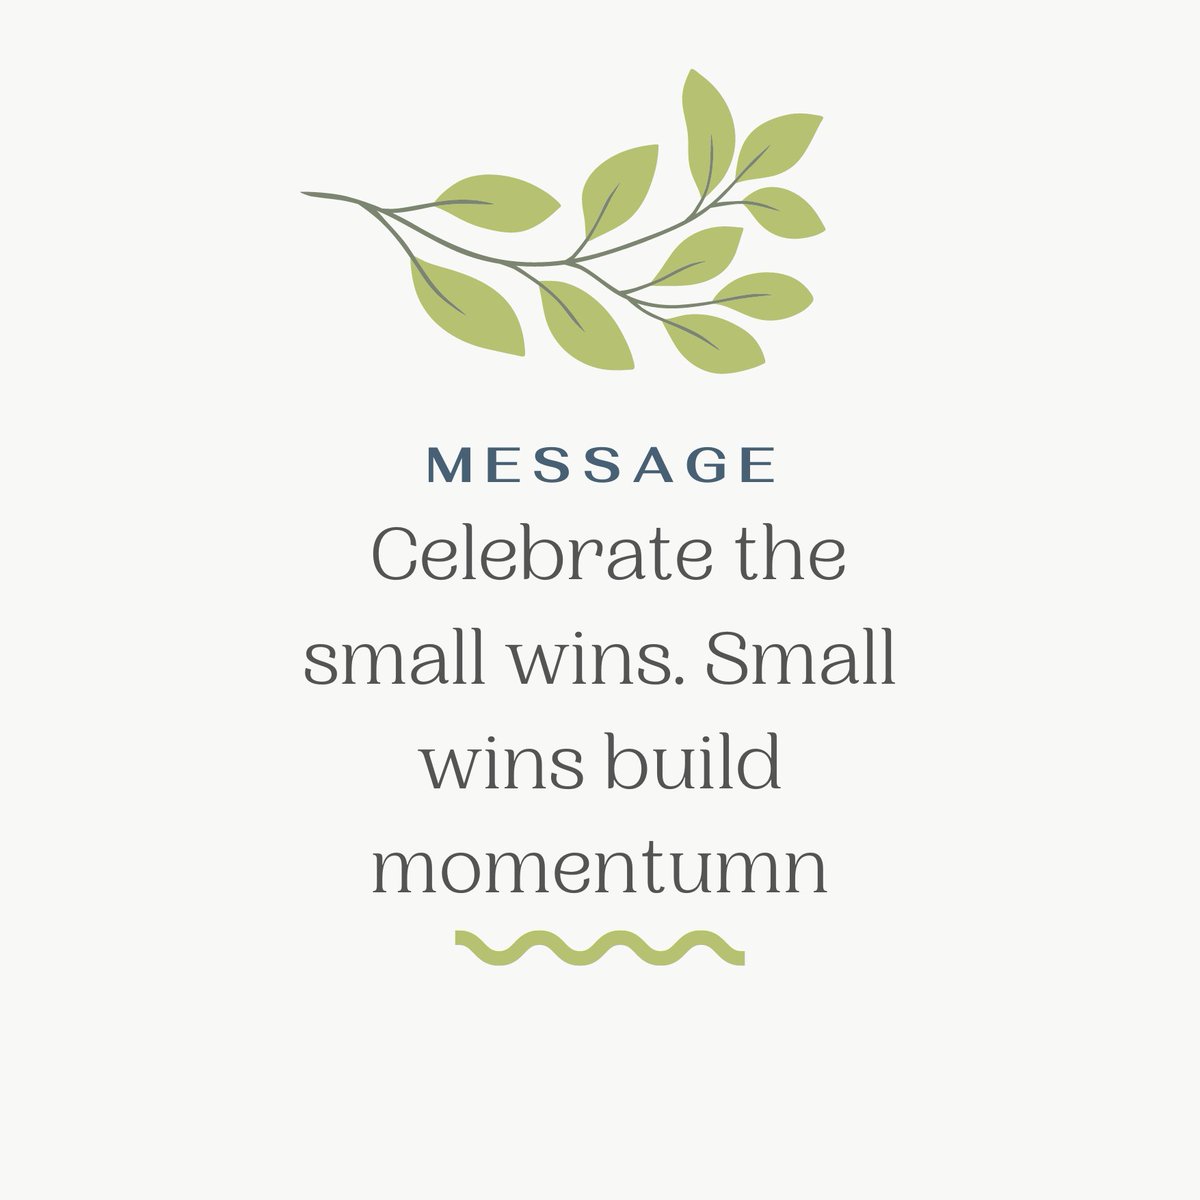 Cheers to the small wins! 🎉 They're the building blocks of momentum on your journey to success. Keep celebrating those victories! 🥂🚀

#SmallWins #CelebrateSuccess #MomentumBuilding #SuccessJourney #AchievementUnlocked #ProgressMatters